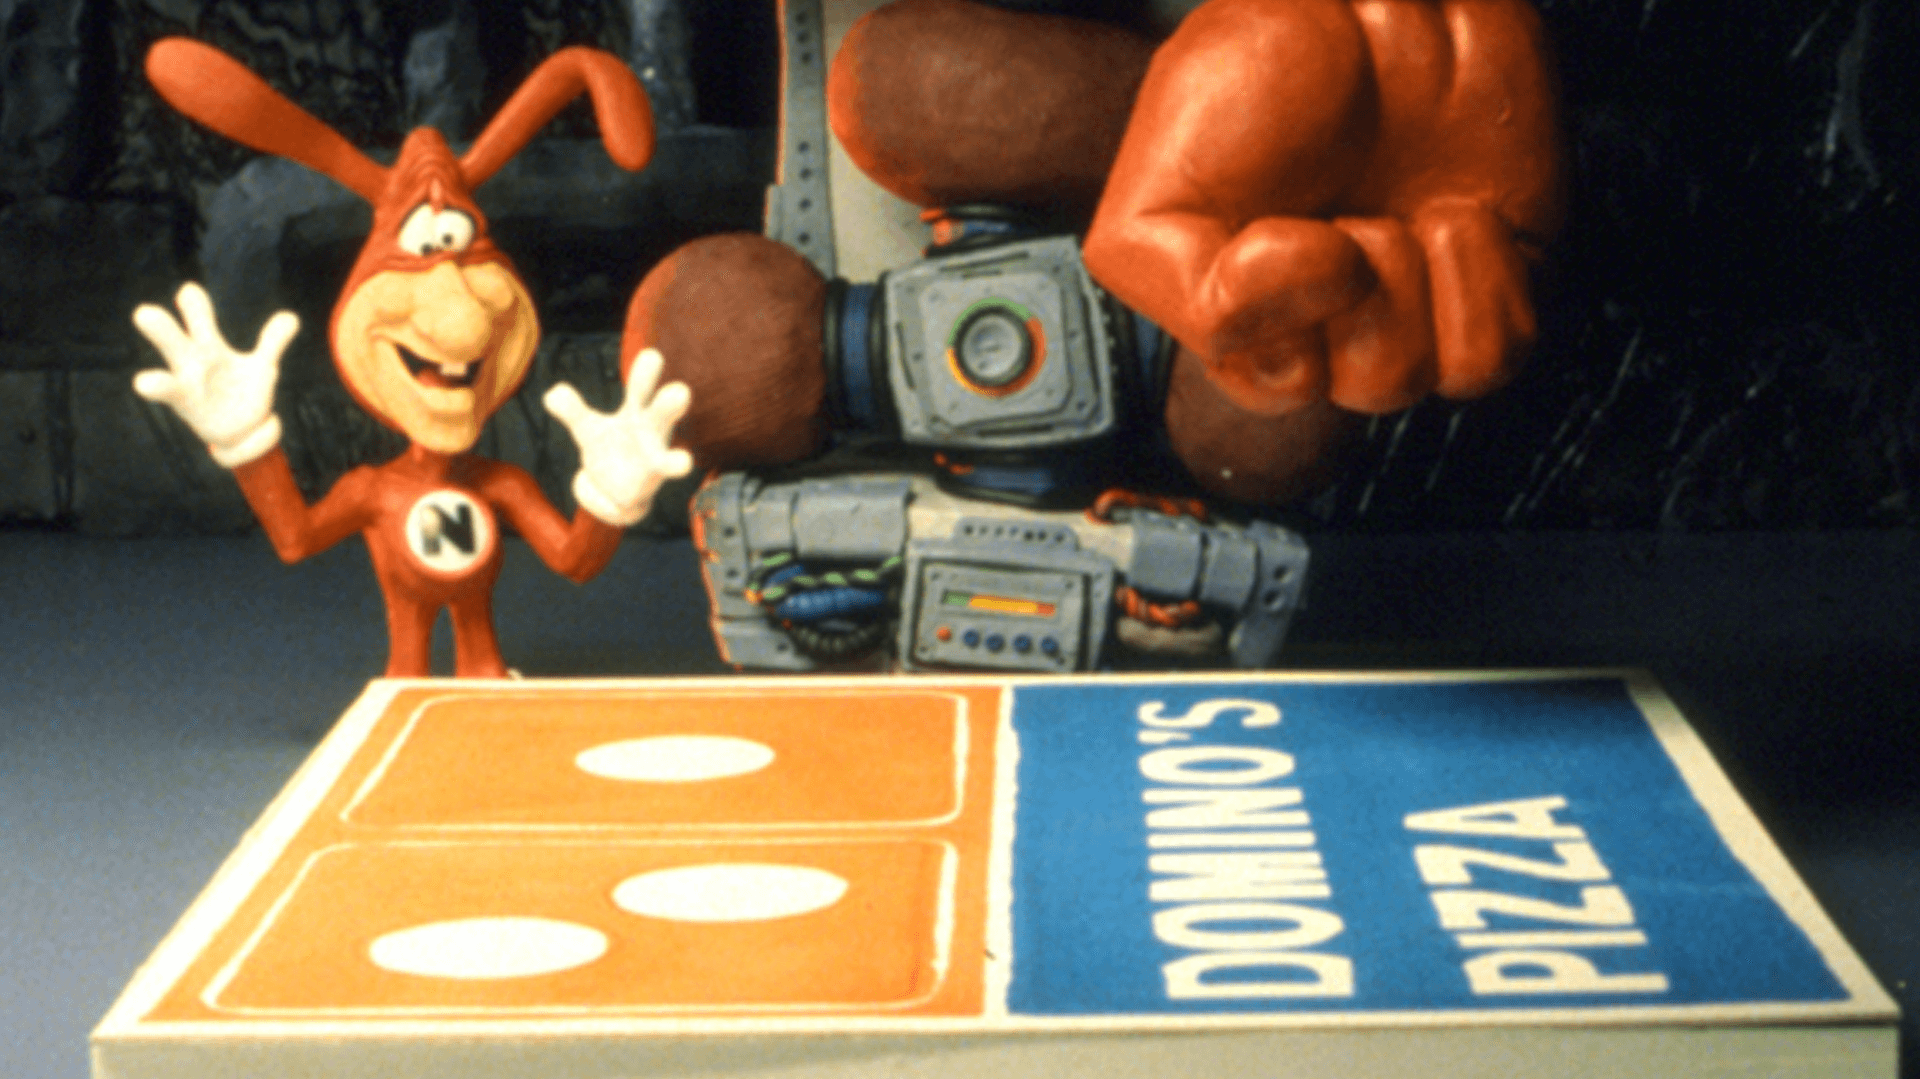 A Domino’s commercial featuring The Noid.